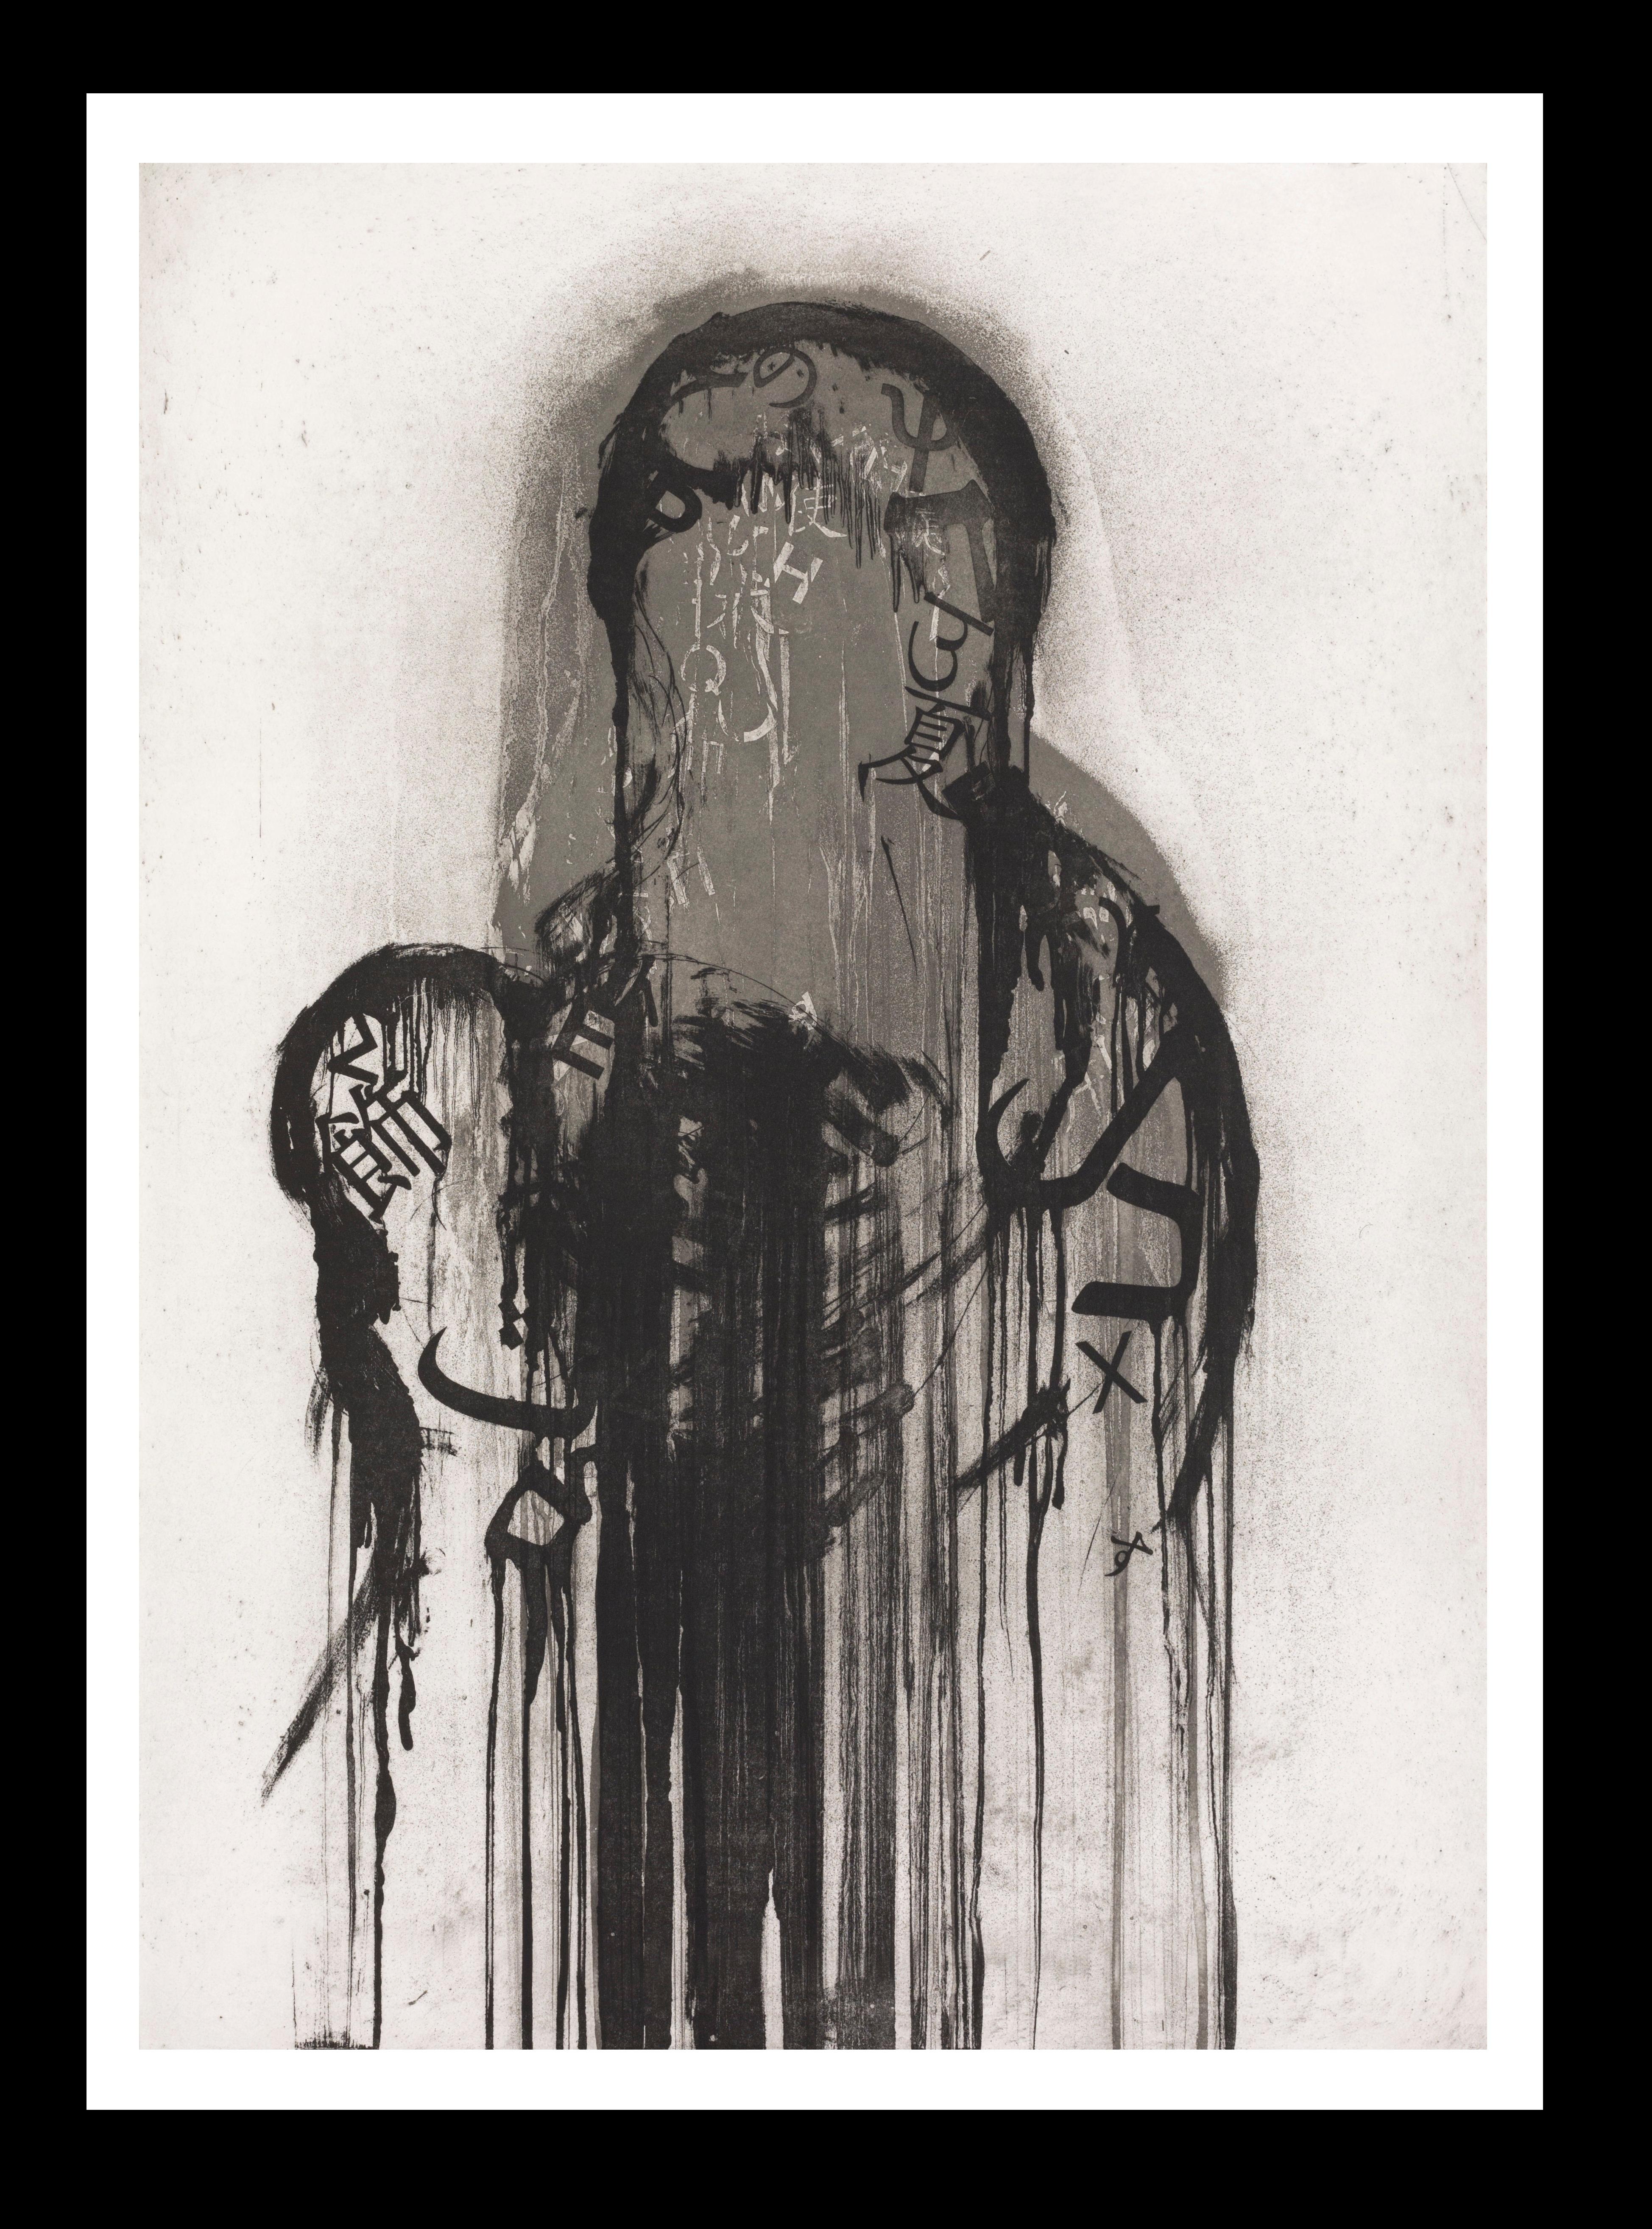 Jaume Plensa Abstract Print - Plensa  BLACK AND WHITE, VERTICAL, MATERNITY, Untitled  etching original 